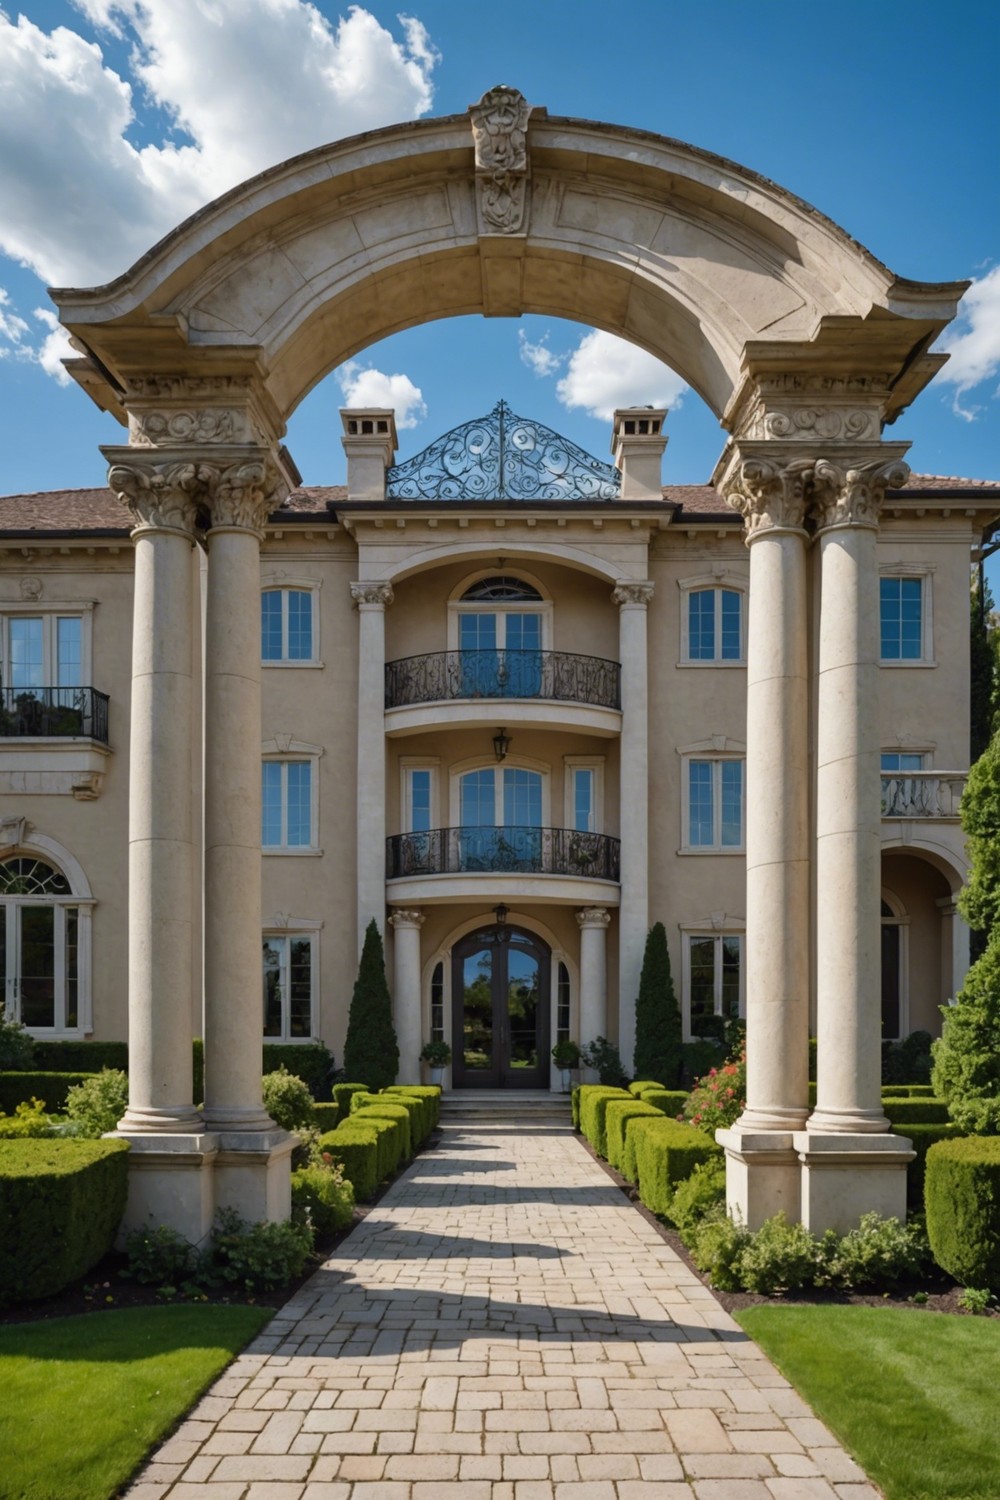 Grand Entrance Pergola with Columns and Archway